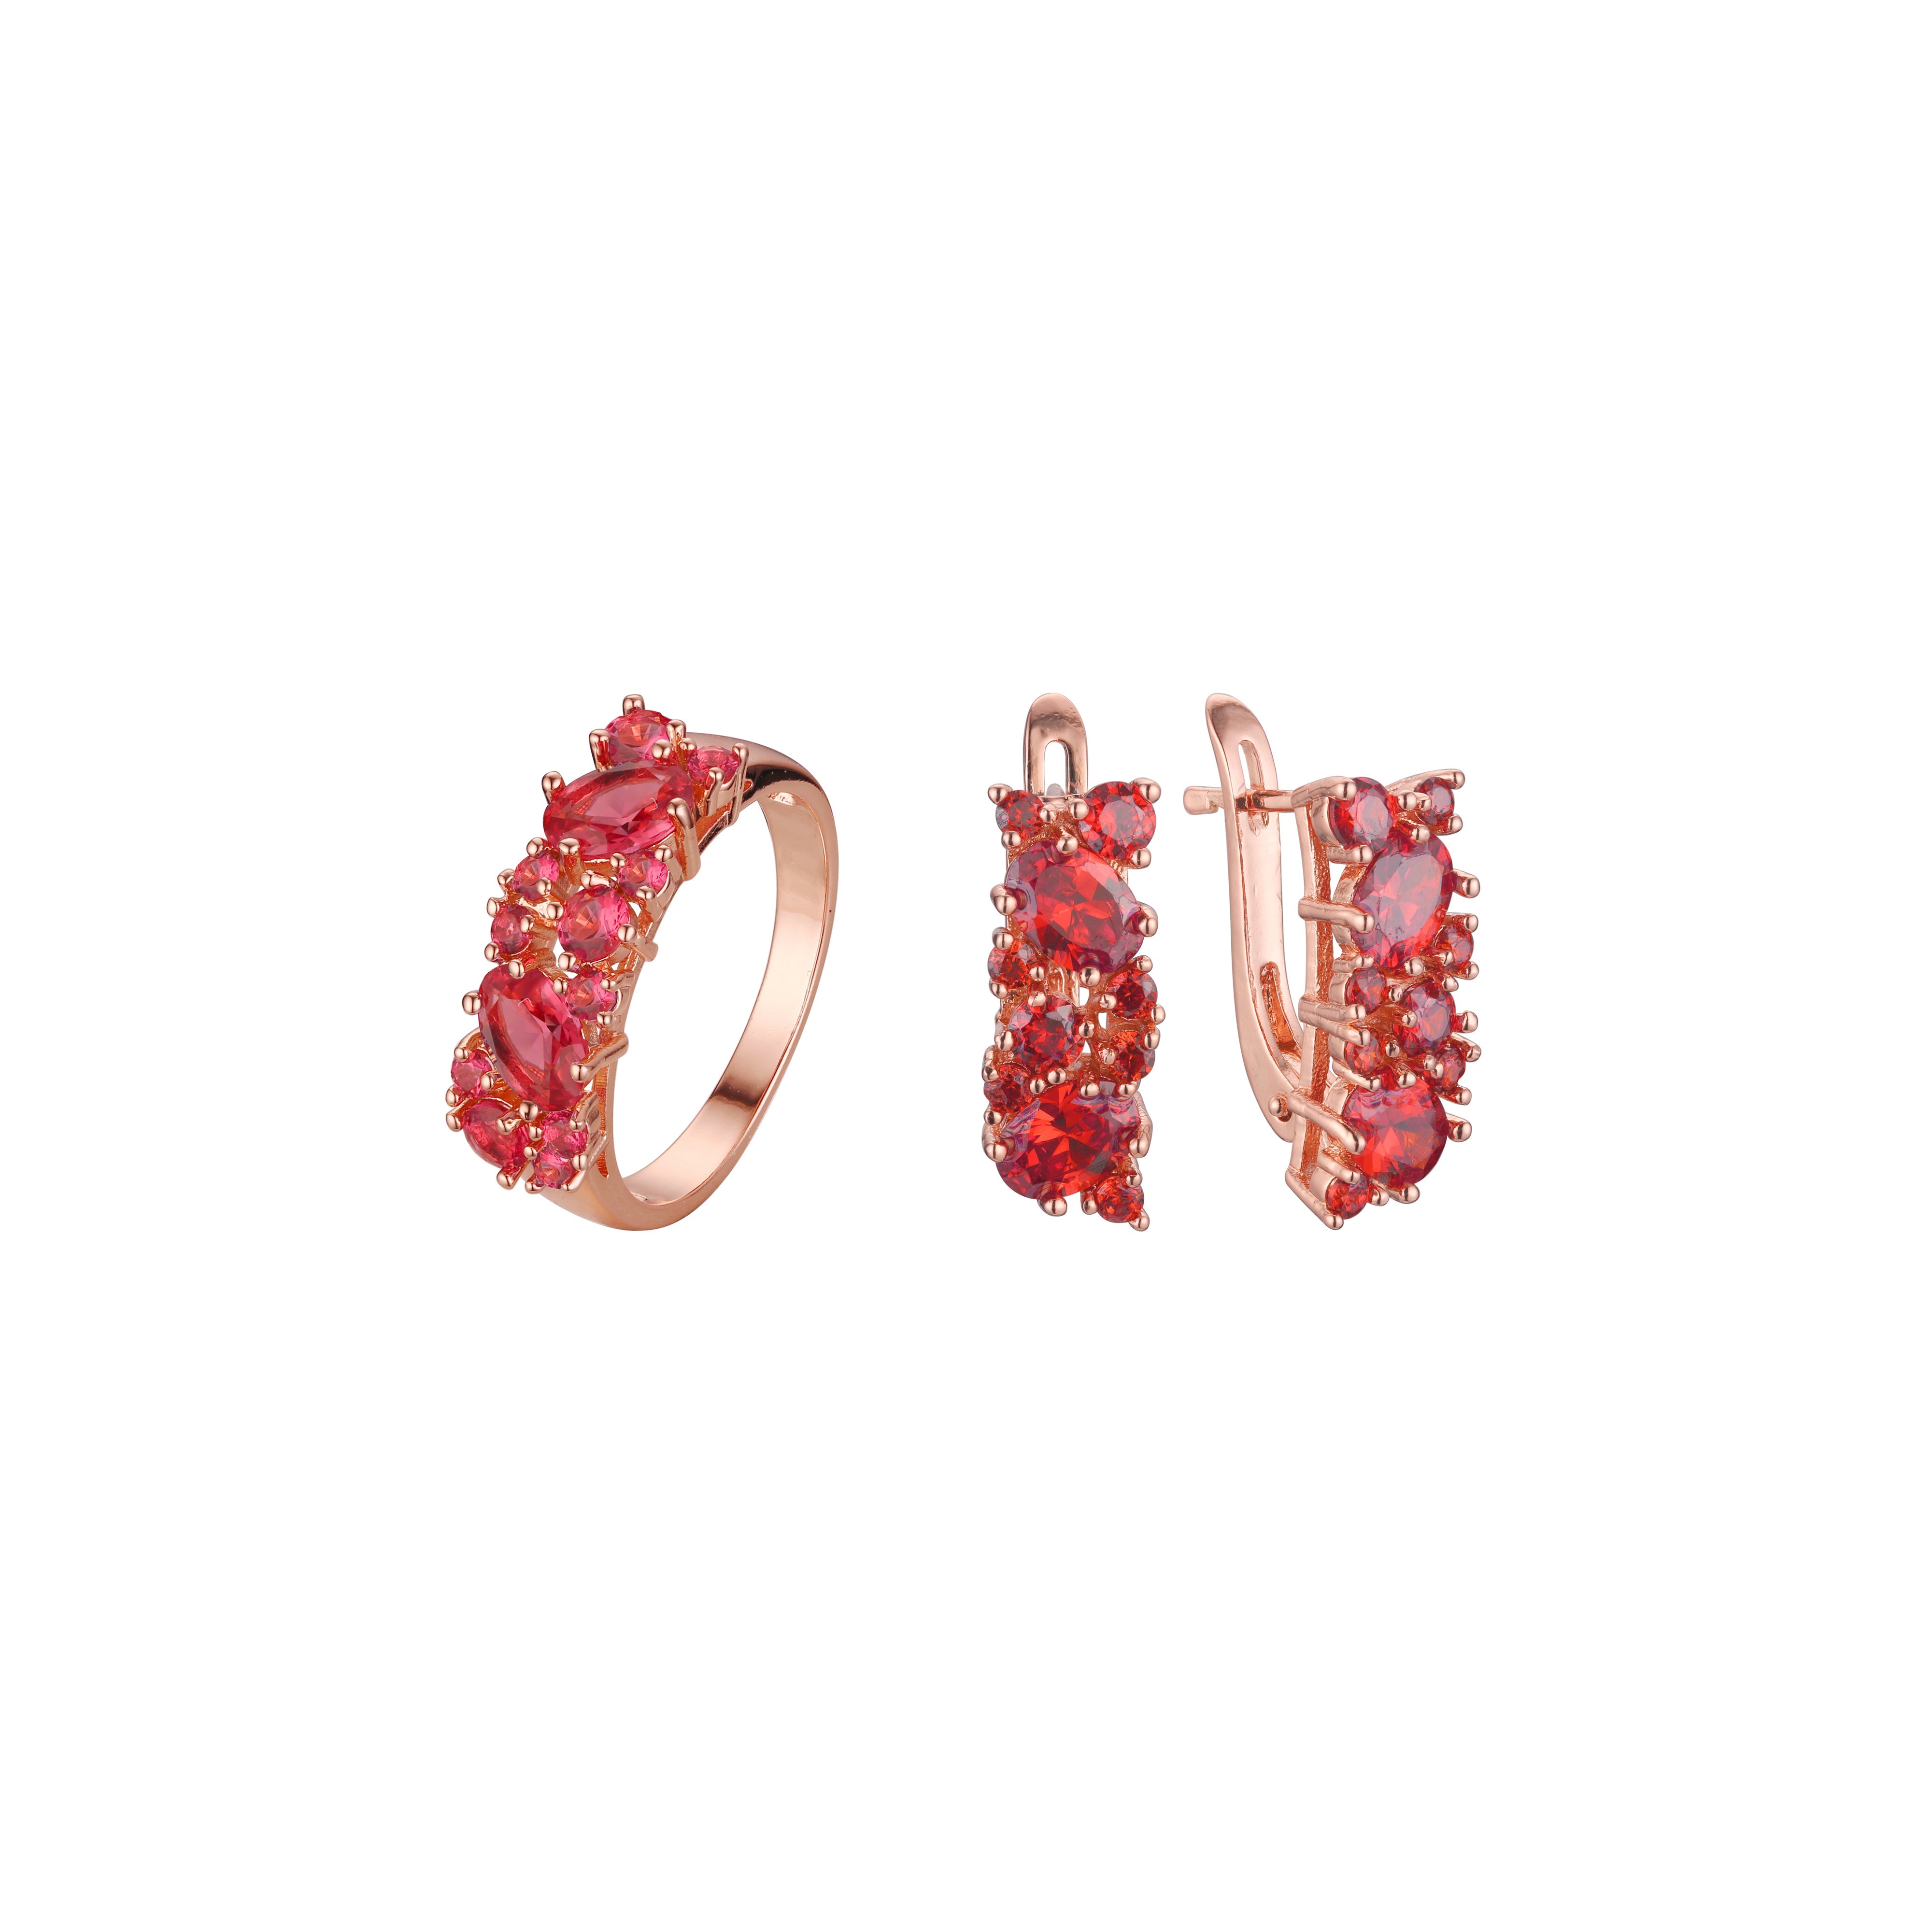 .Luxurious colorful cluster rings Rose Gold jewelry set